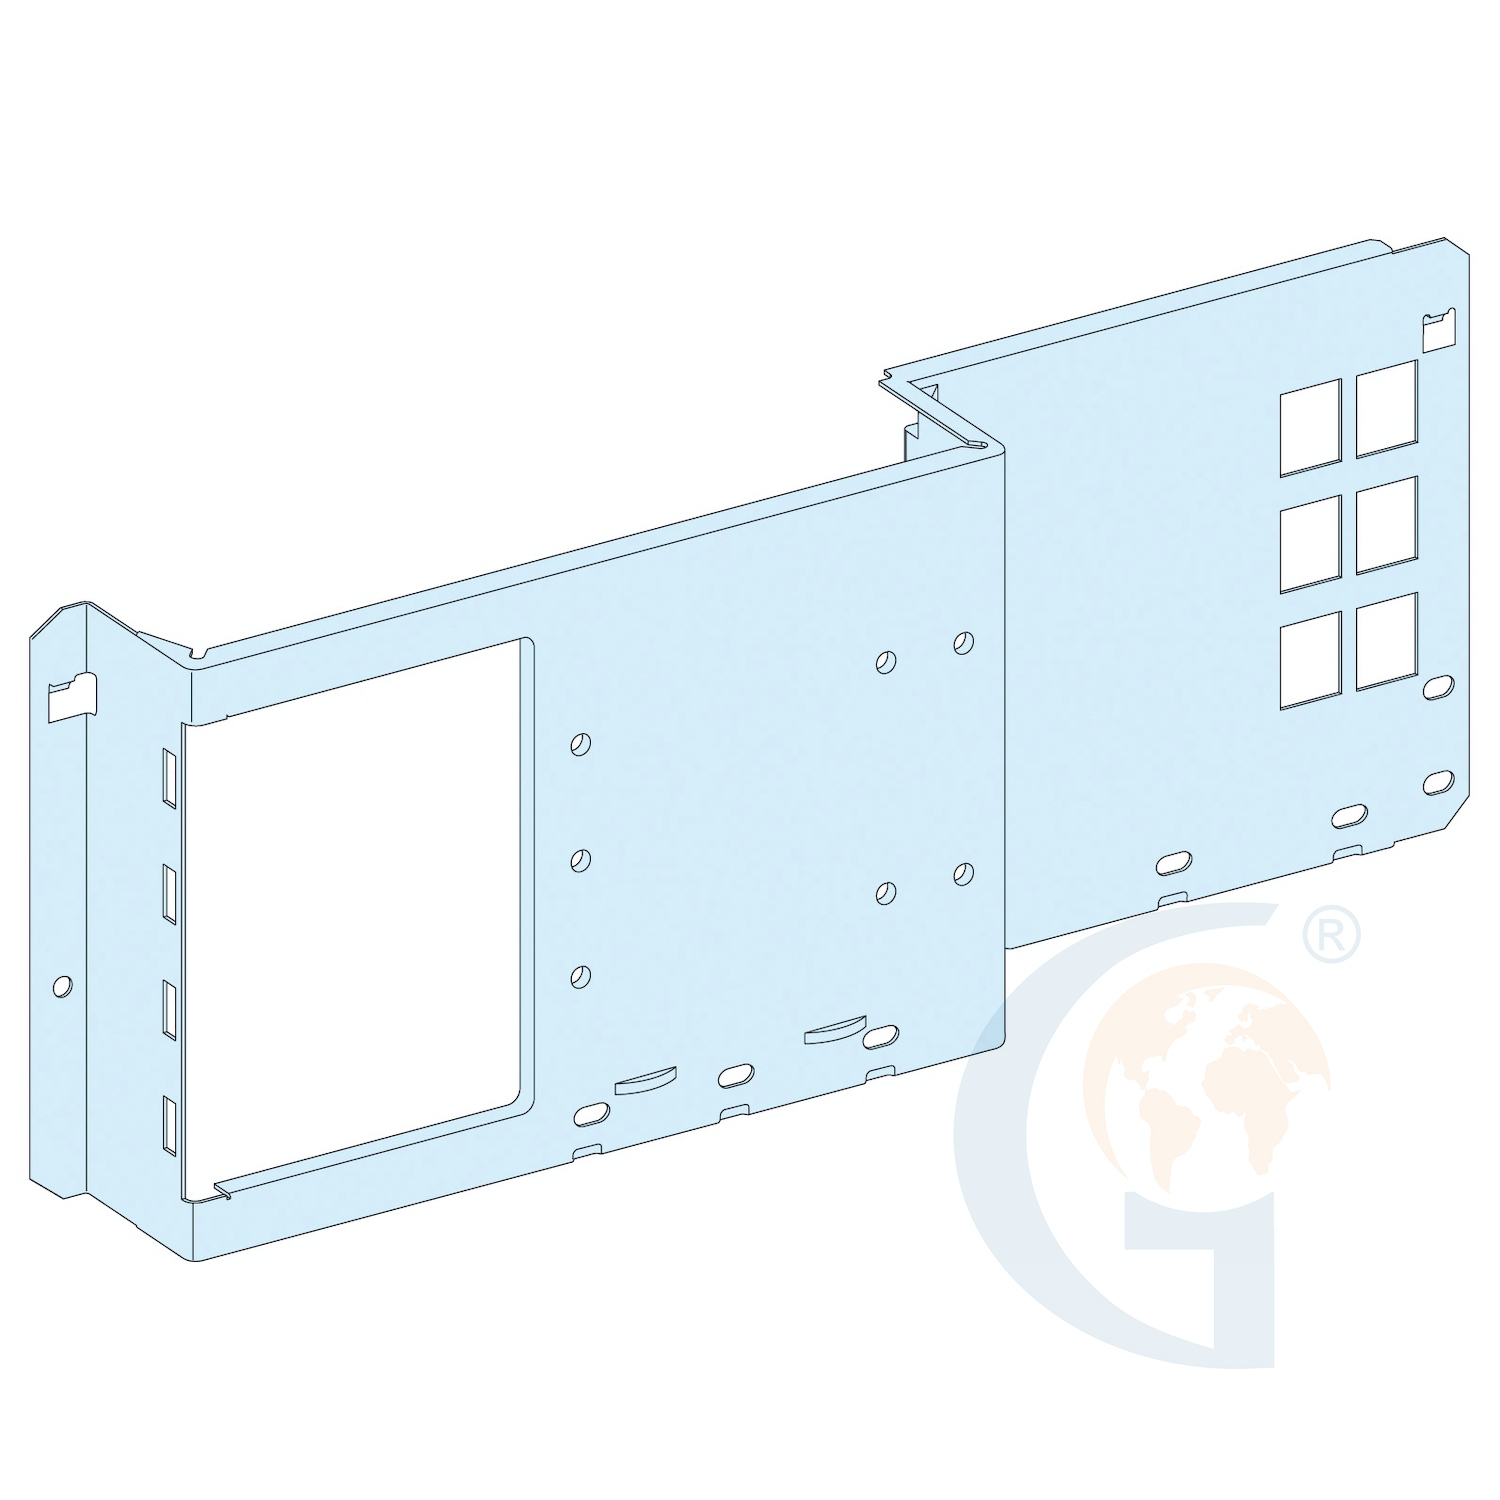 Schneider Electric 03030 MOUNTING PLATE NSX/CVS/INS 250 HZ.FIXED TOGGLE https://gesrepair.com/wp-content/uploads/2020/Schneider/Schneider_Electric_03030_.jpg